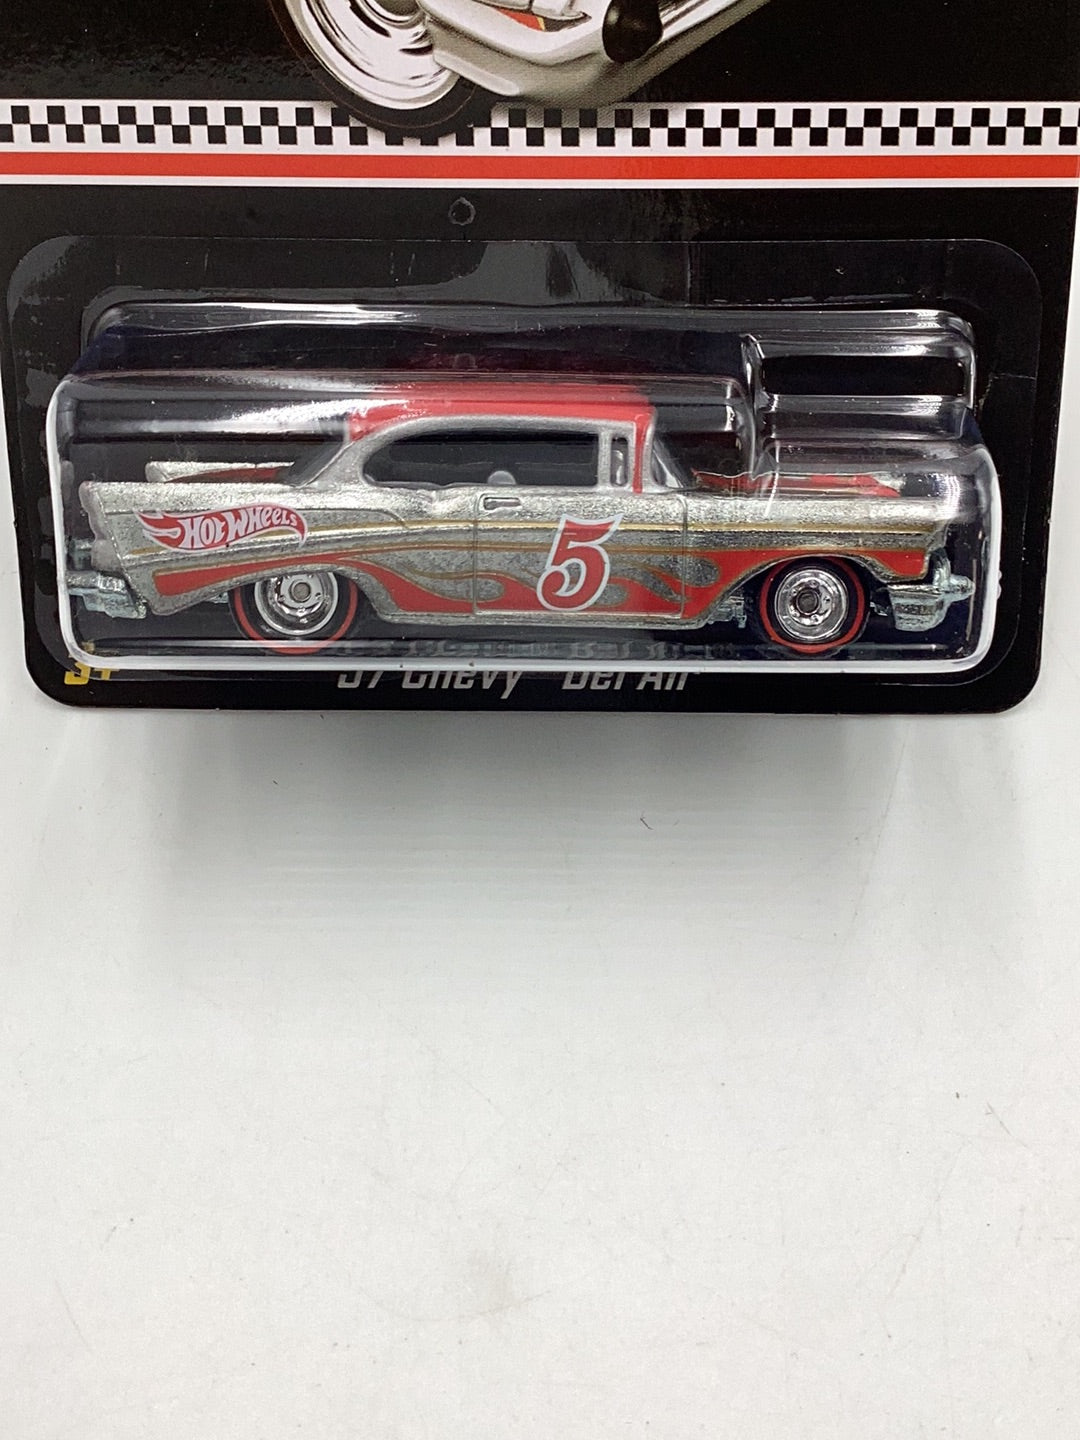 2015 Hot wheels  collectors edition 57 Chevy Bel Air mail in Zamac edition Real Riders with protector